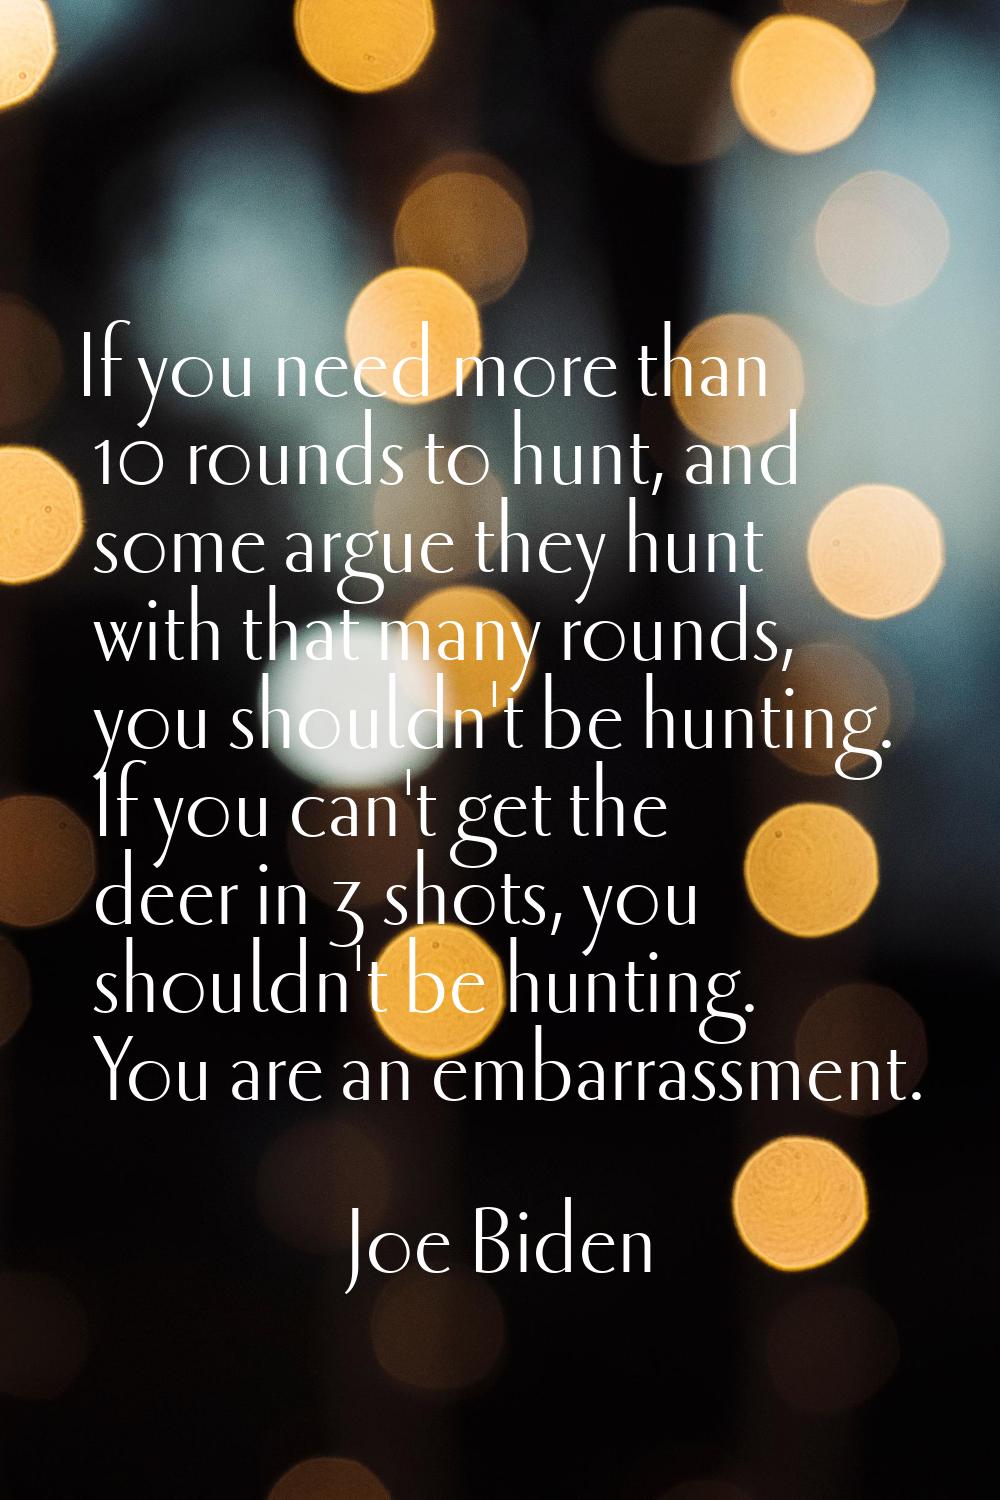 If you need more than 10 rounds to hunt, and some argue they hunt with that many rounds, you should